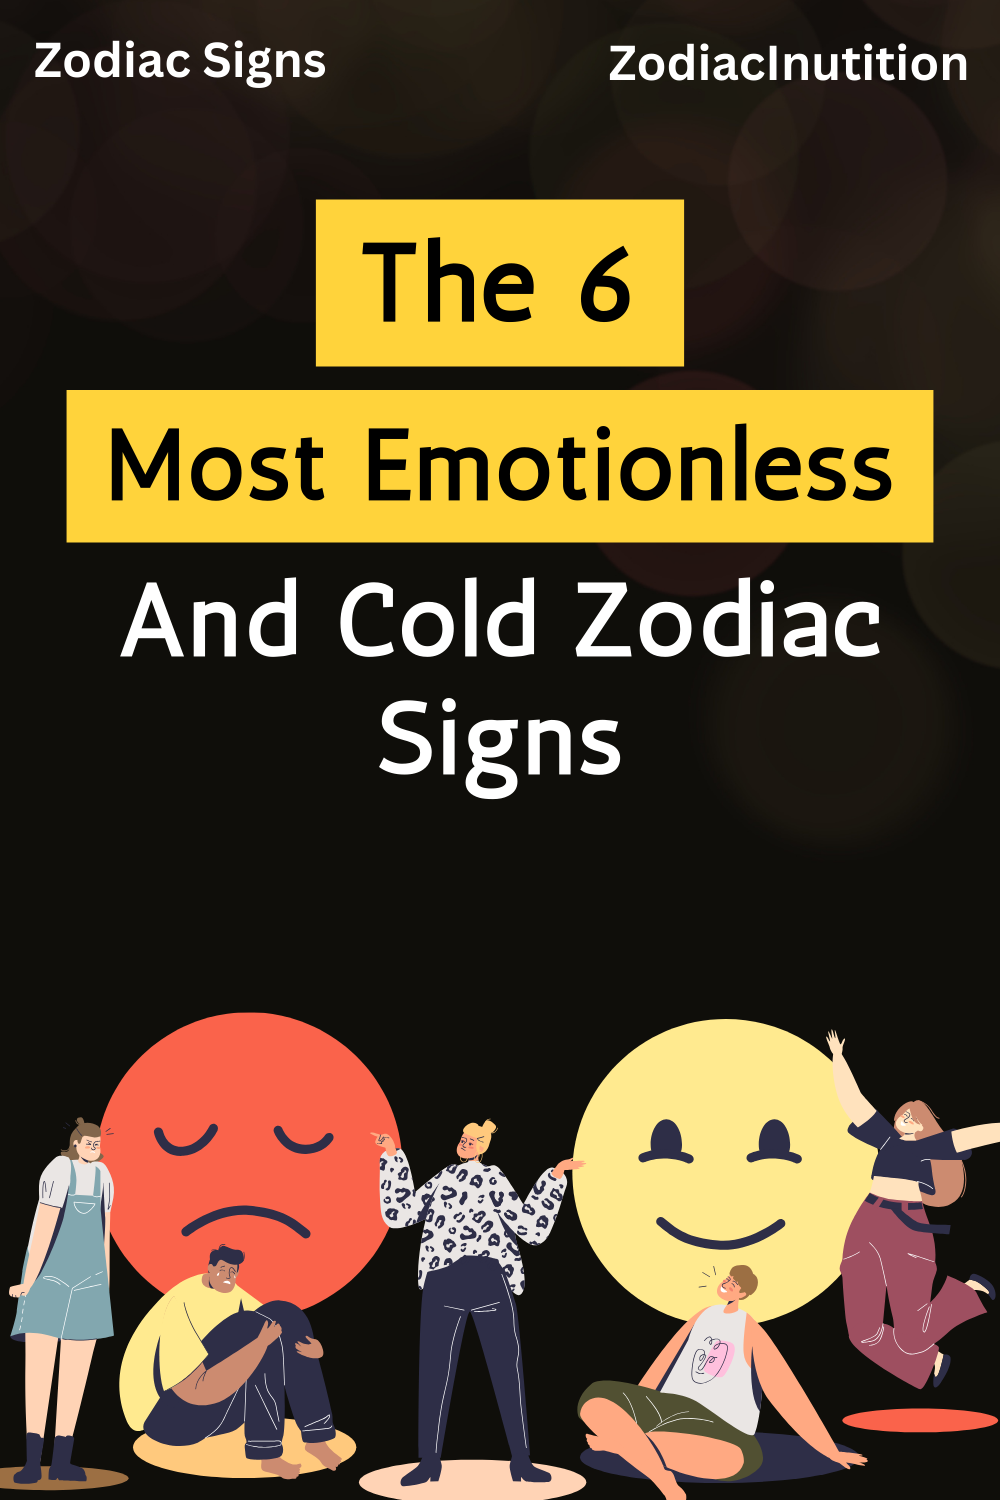 The 6 Most Emotionless And Cold Zodiac Signs